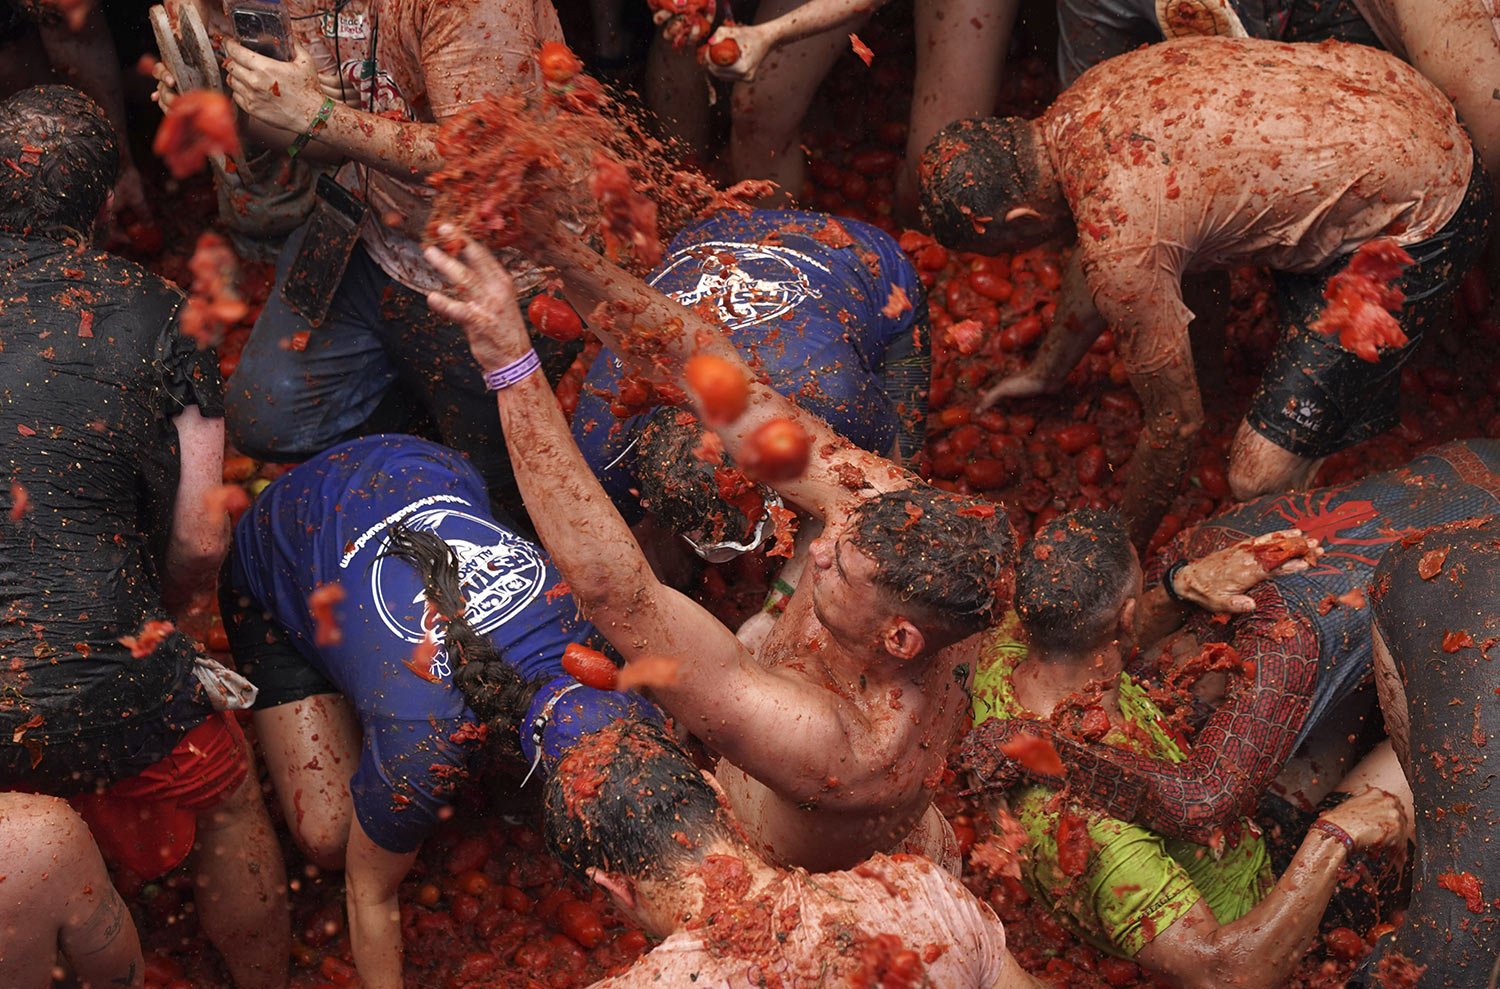  People pelt each other with overripe tomatoes during the the annual "Tomatina" festival, in Bunol, Spain, Wednesday, Aug. 30, 2023. (AP Photo/Alberto Saiz) 